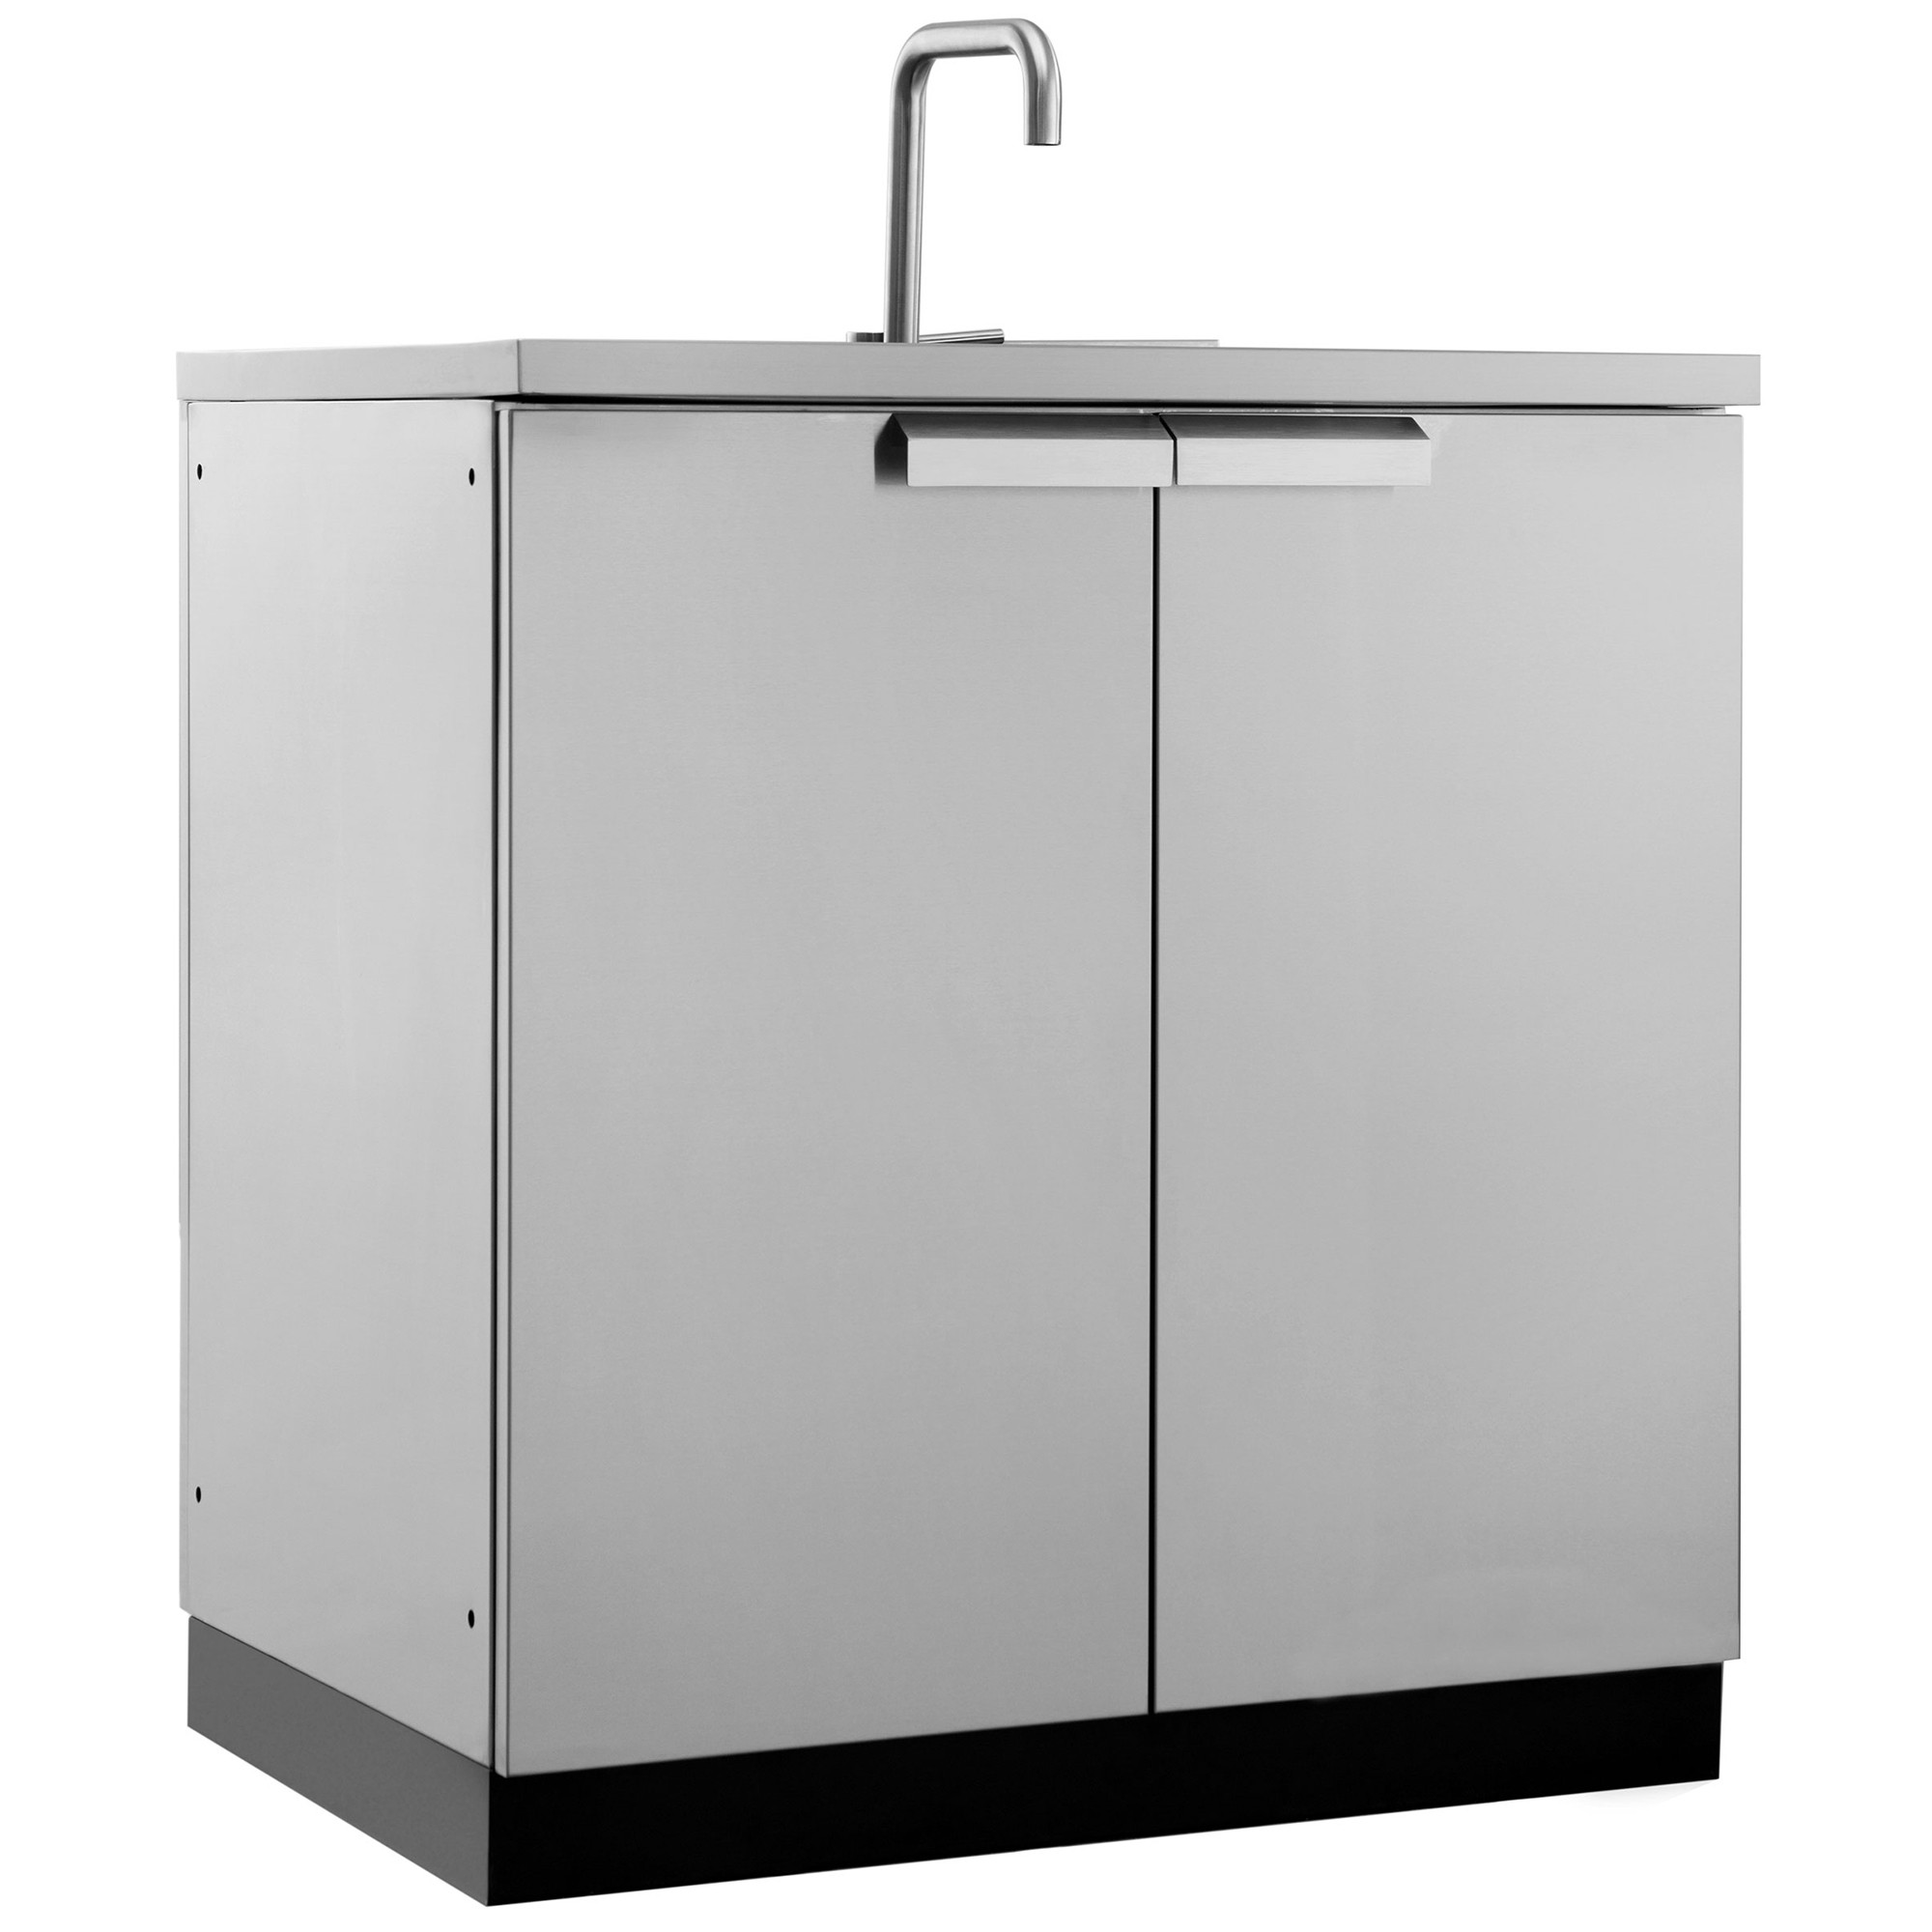 Kitchen Sink And Cabinets
 NewAge Products Outdoor Kitchen 32"W X 24"D Sink Cabinet